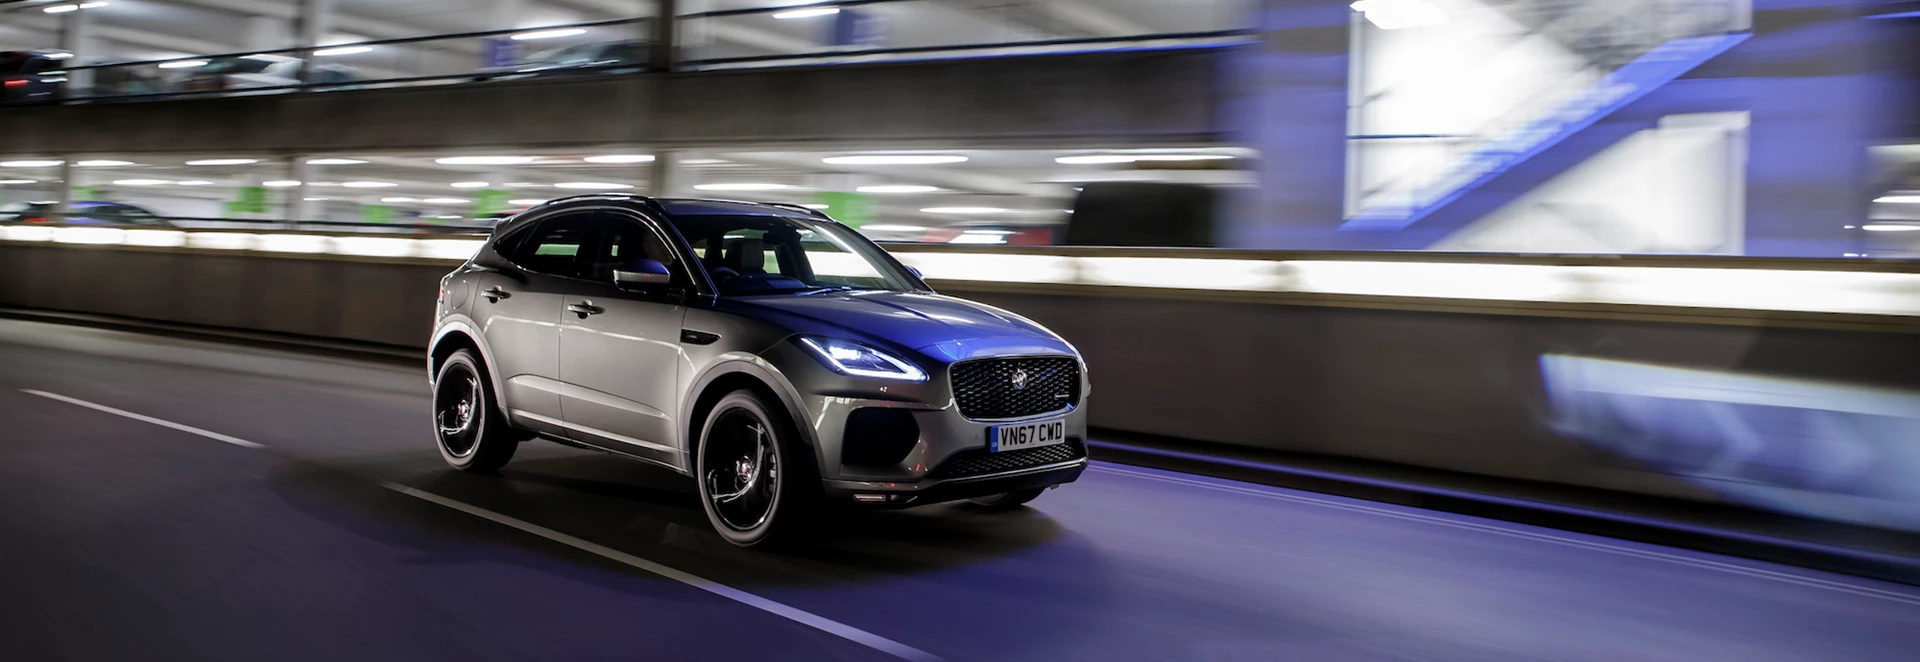 Jaguar E-Pace: five reasons the sporty compact SUV will sell big